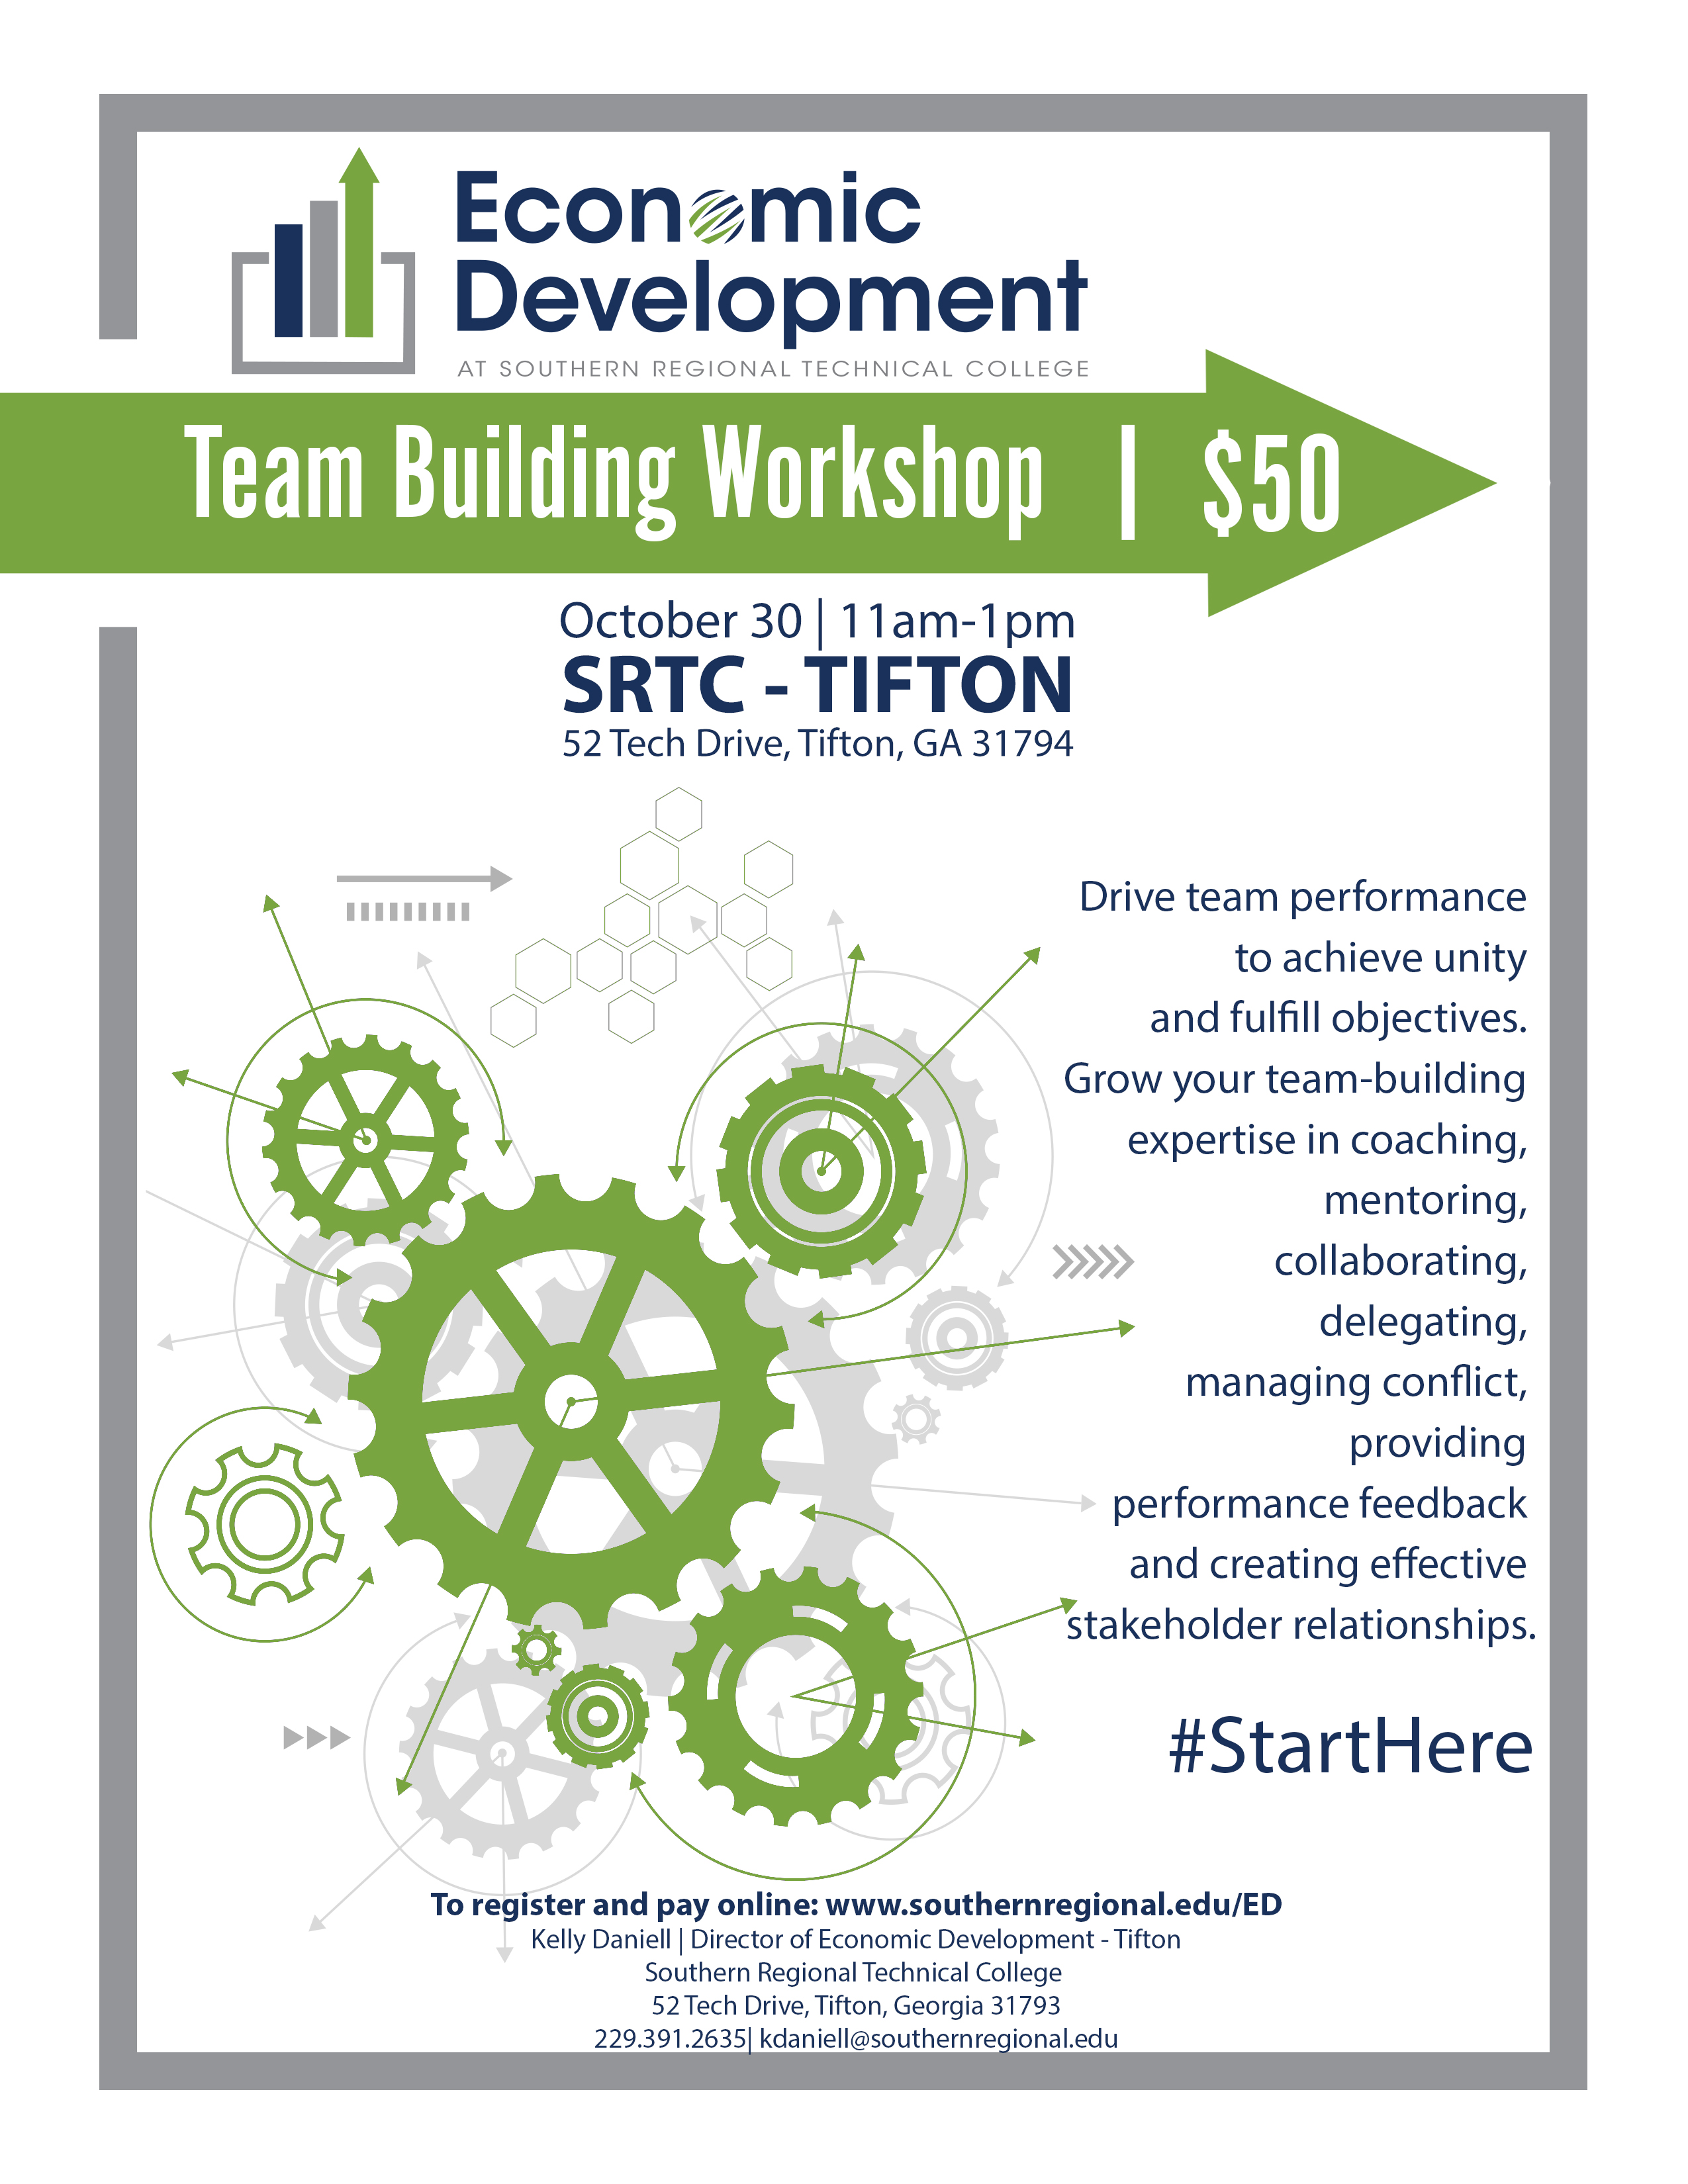 Photo for Team Building Workshop Offered by Economic Development at SRTC- Tifton 